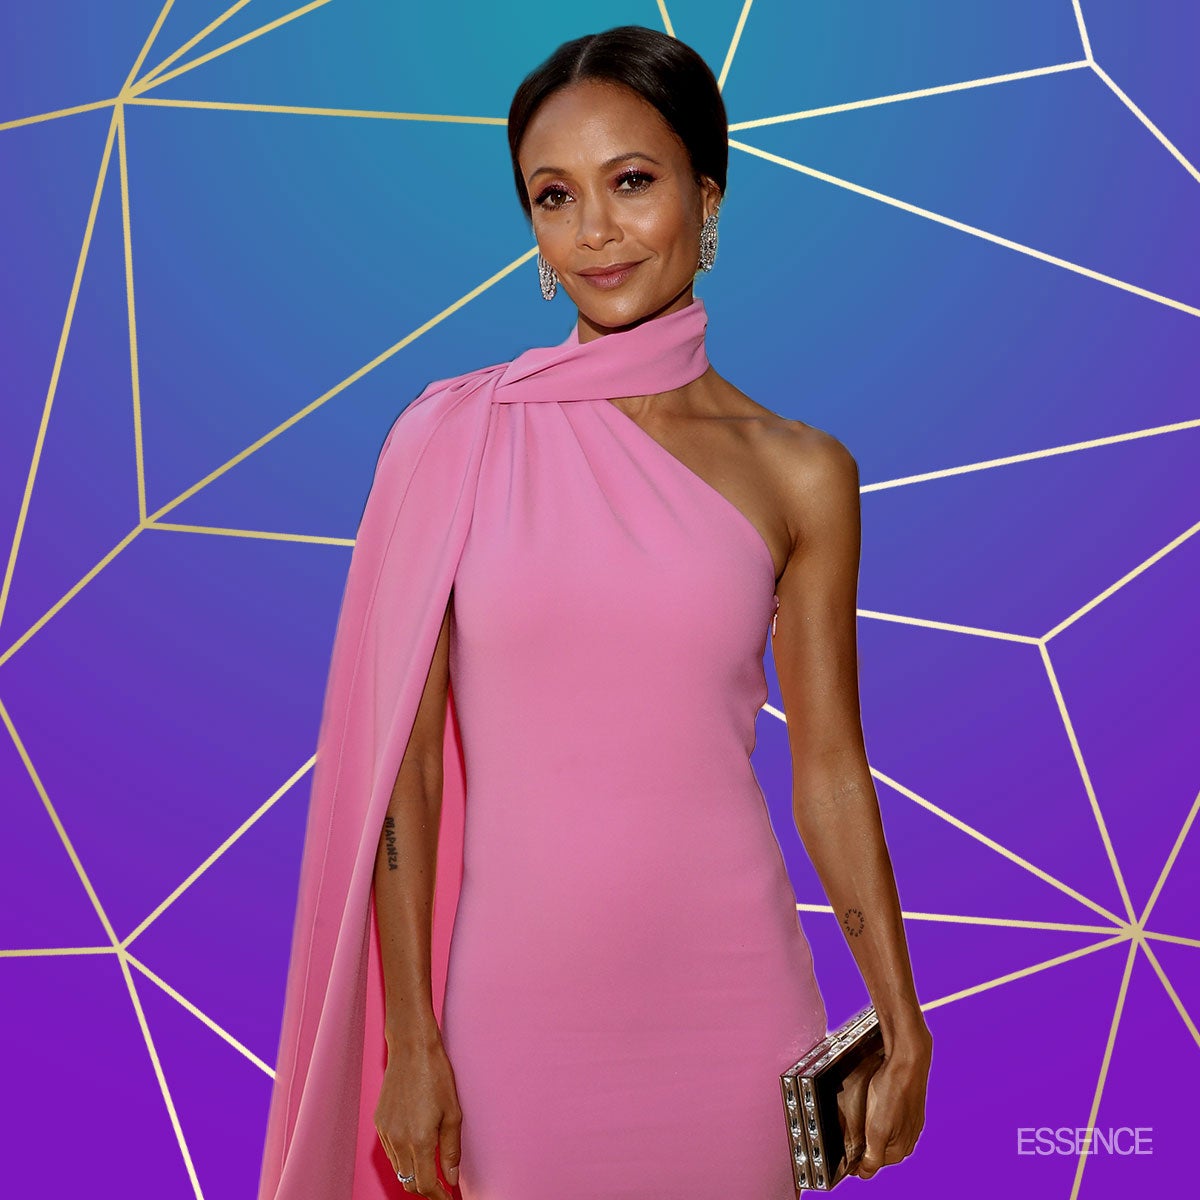 ‘Westworld’ Star Thandie Newton On First Emmy Win: ‘I Don’t Even Believe In God But I’m Going To Thank Her’